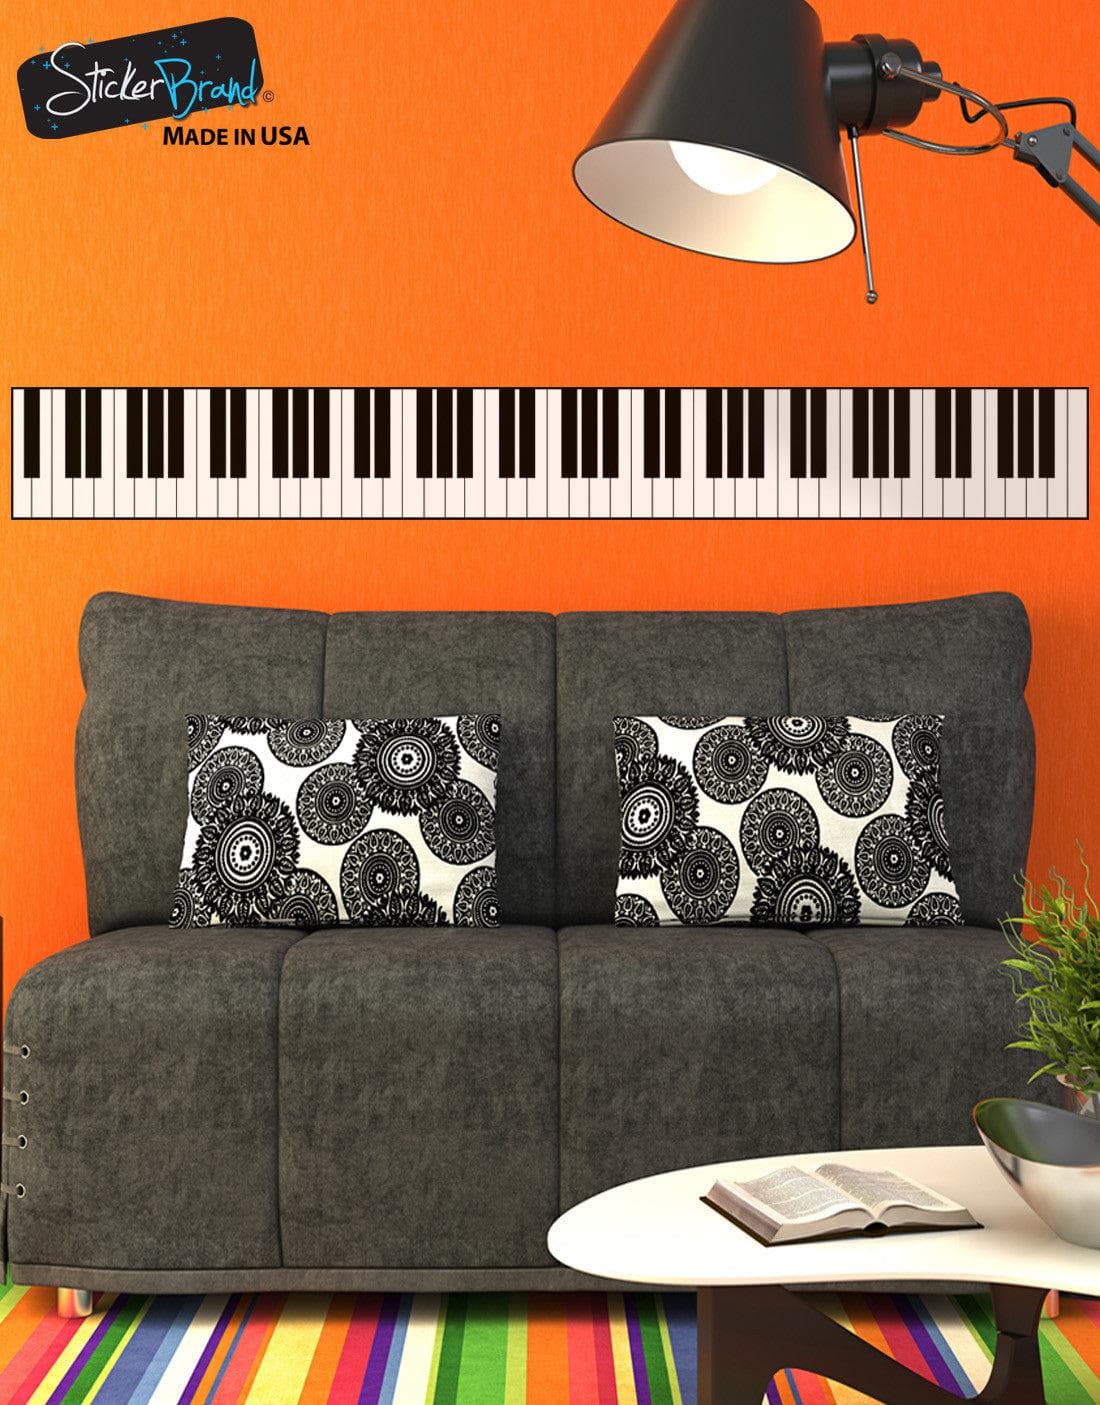 Abstract Piano Keyboard Vinyl Wall Decal Sticker. #1111 – StickerBrand